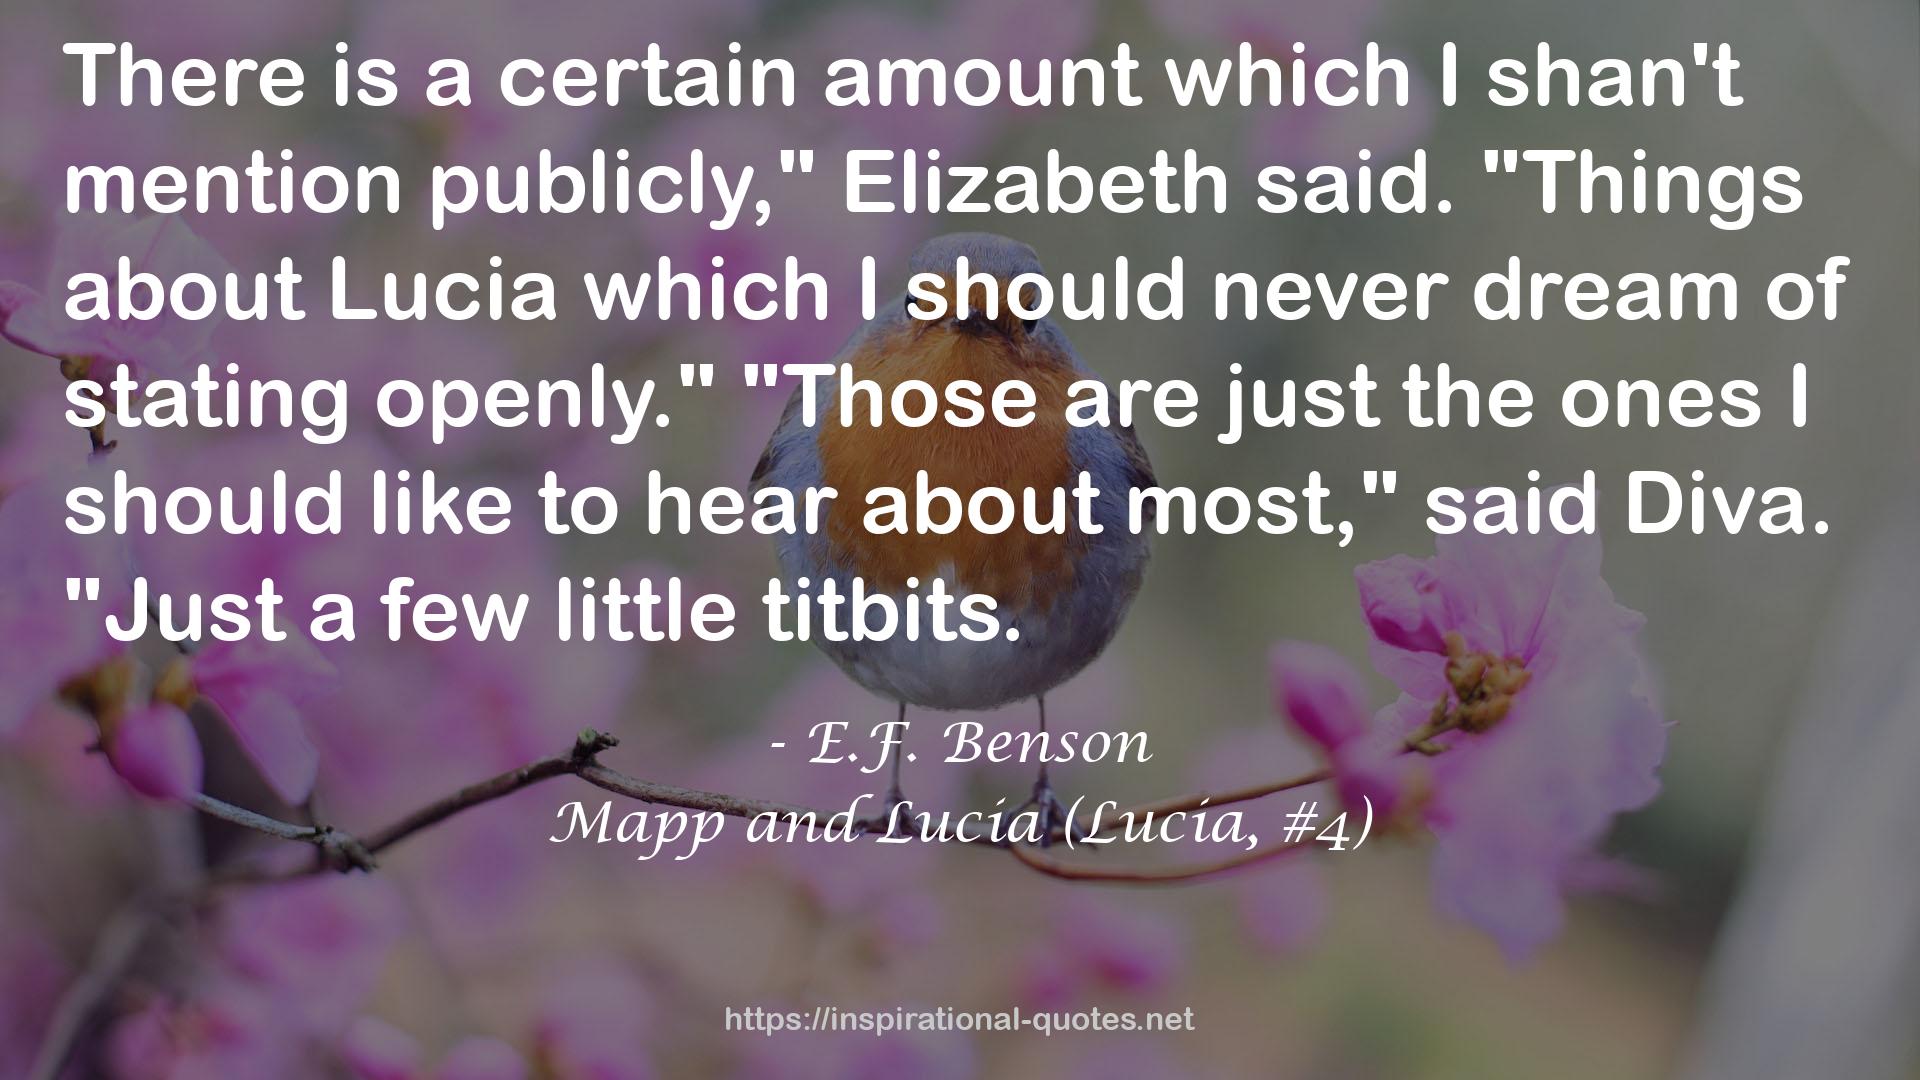 Mapp and Lucia (Lucia, #4) QUOTES